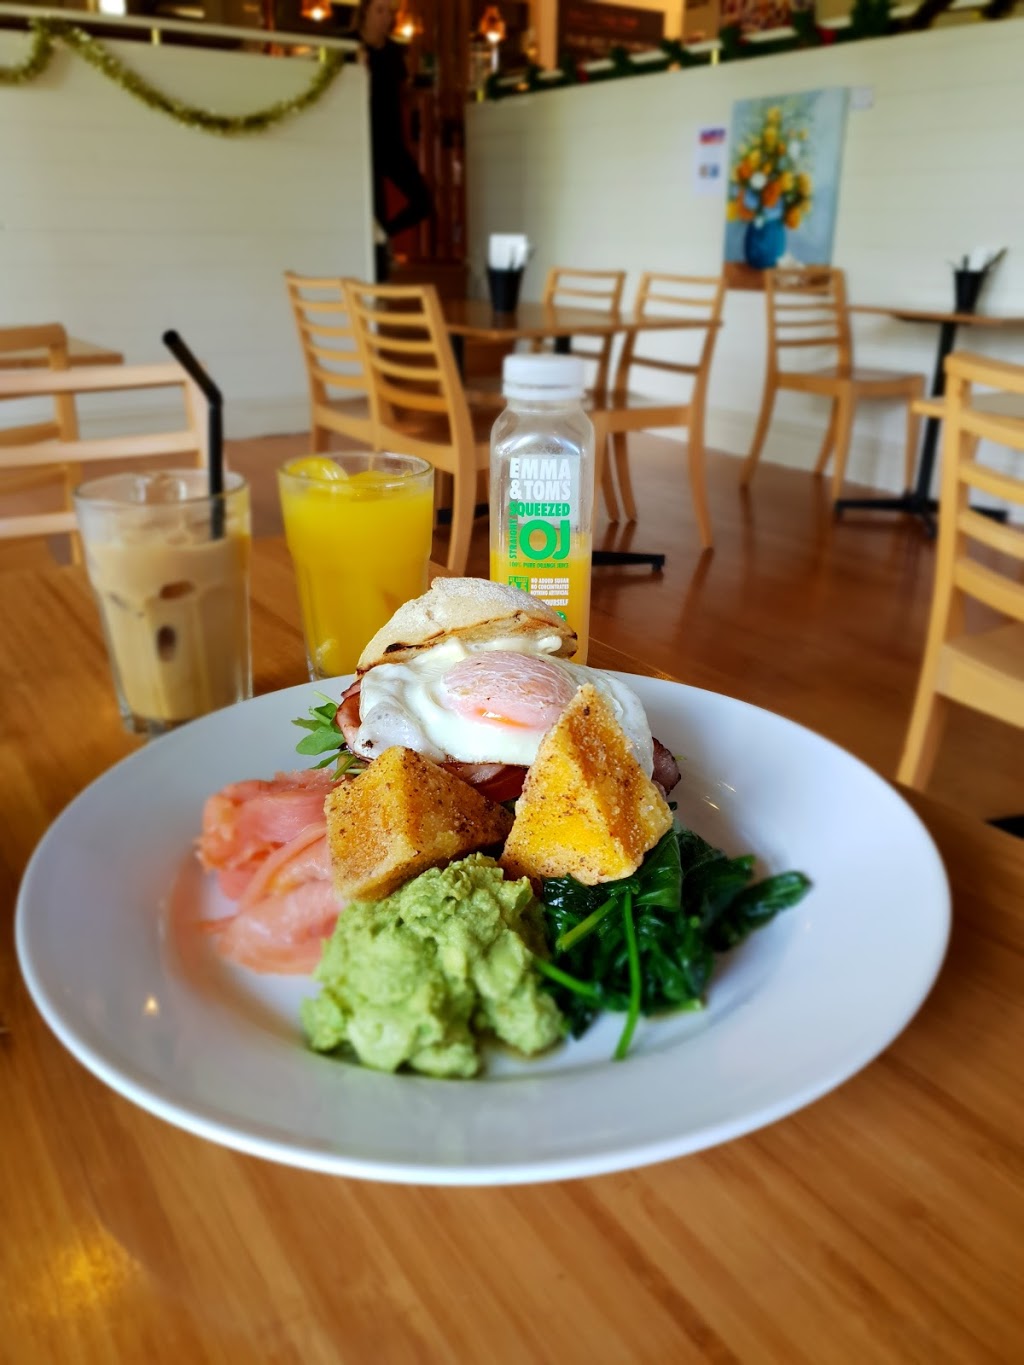 The Boathouse Cafe | cafe | 366/368 Nepean Hwy, Frankston VIC 3199, Australia | 0397705350 OR +61 3 9770 5350